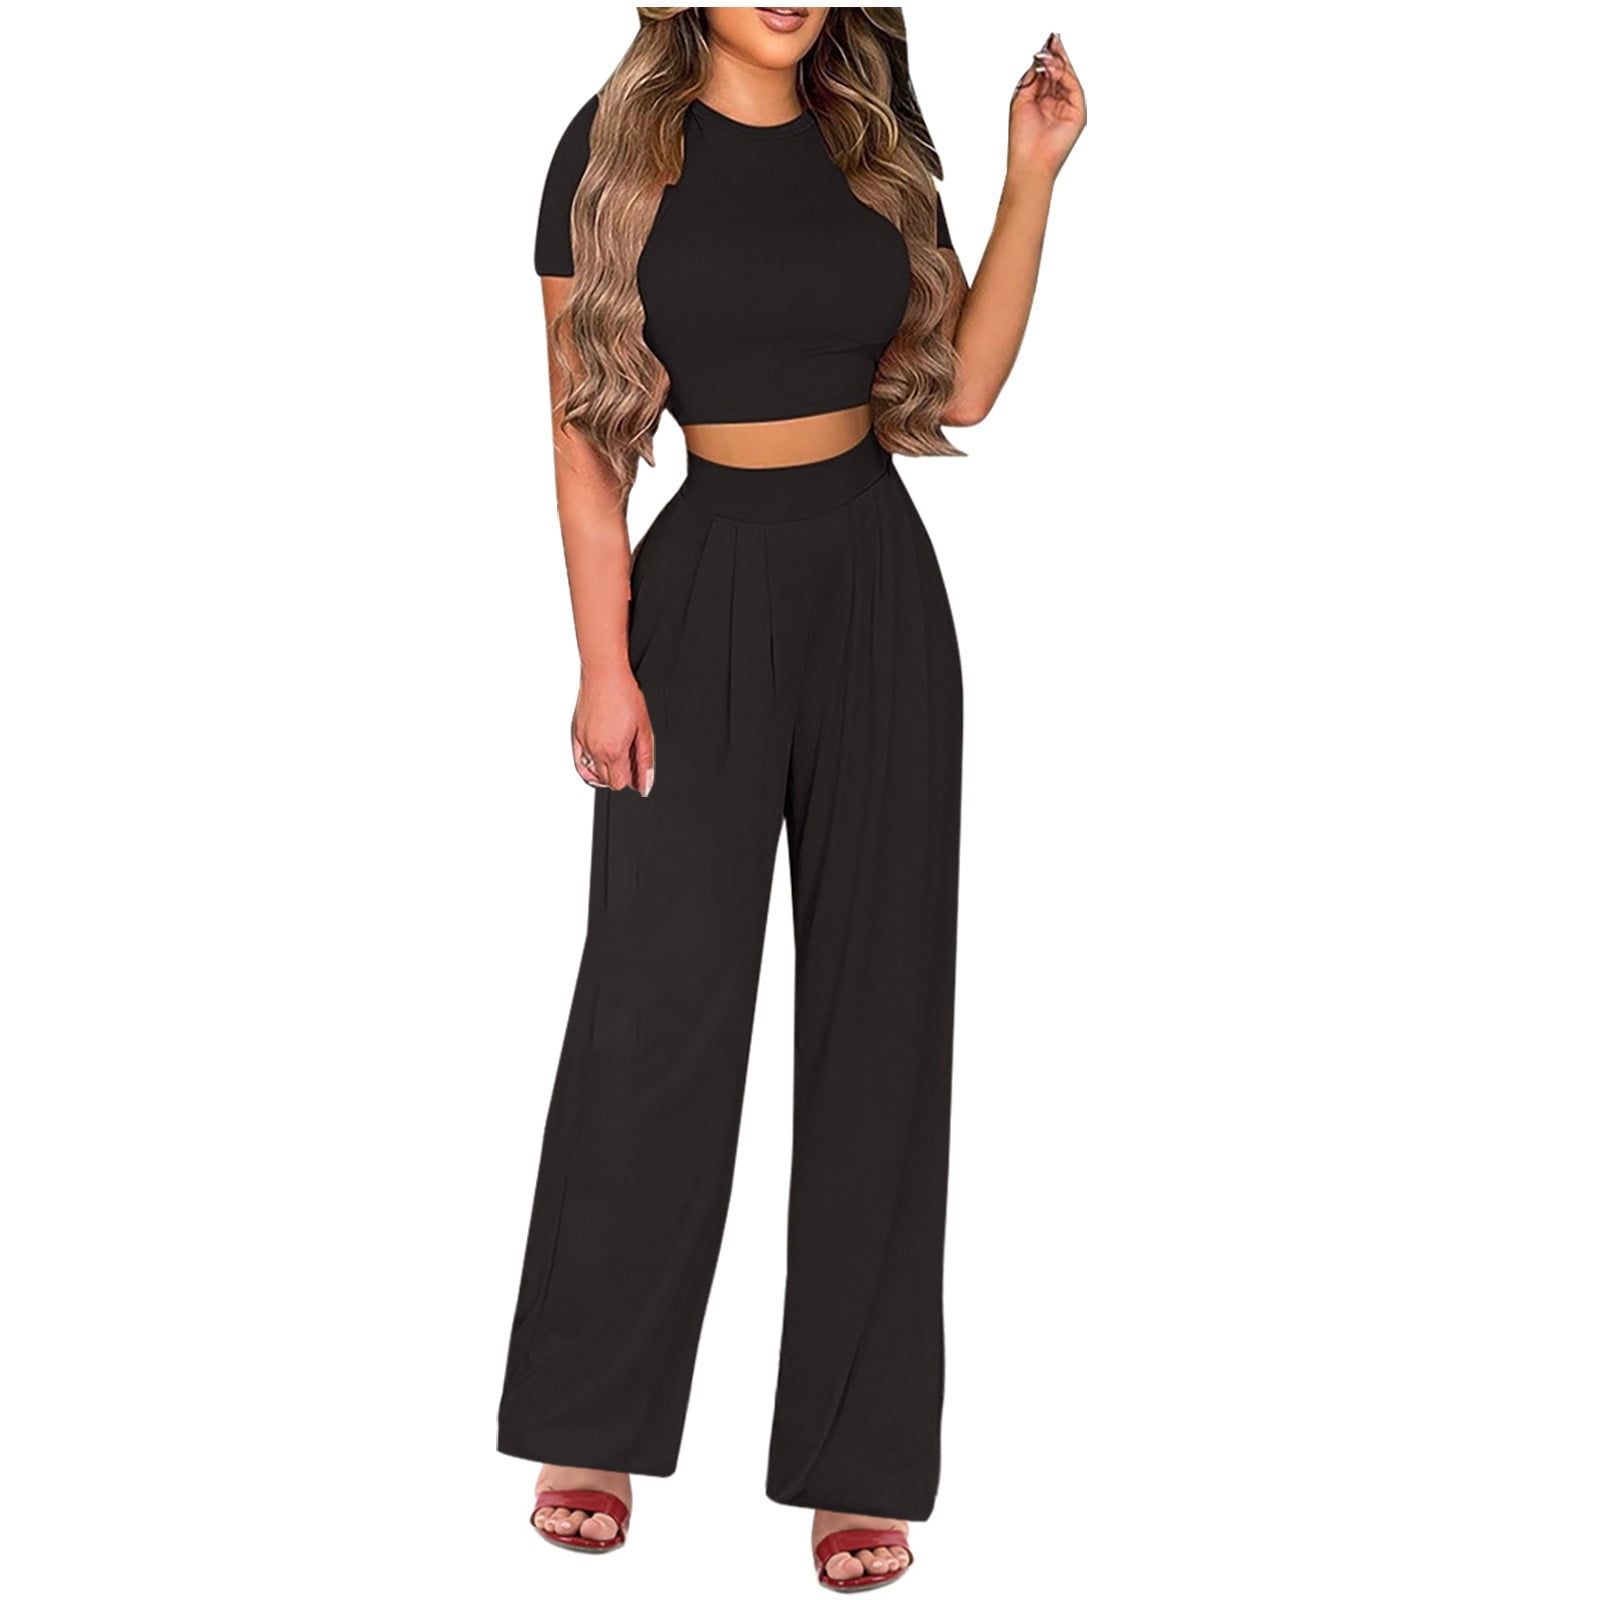 RQYYD Reduced Casual Summer 2 Piece Outfits for Women Short Sleeve Crop Top High  Waist Wide Leg Pants Sets Floral Pleated Plus Size Lounge Set Black M 